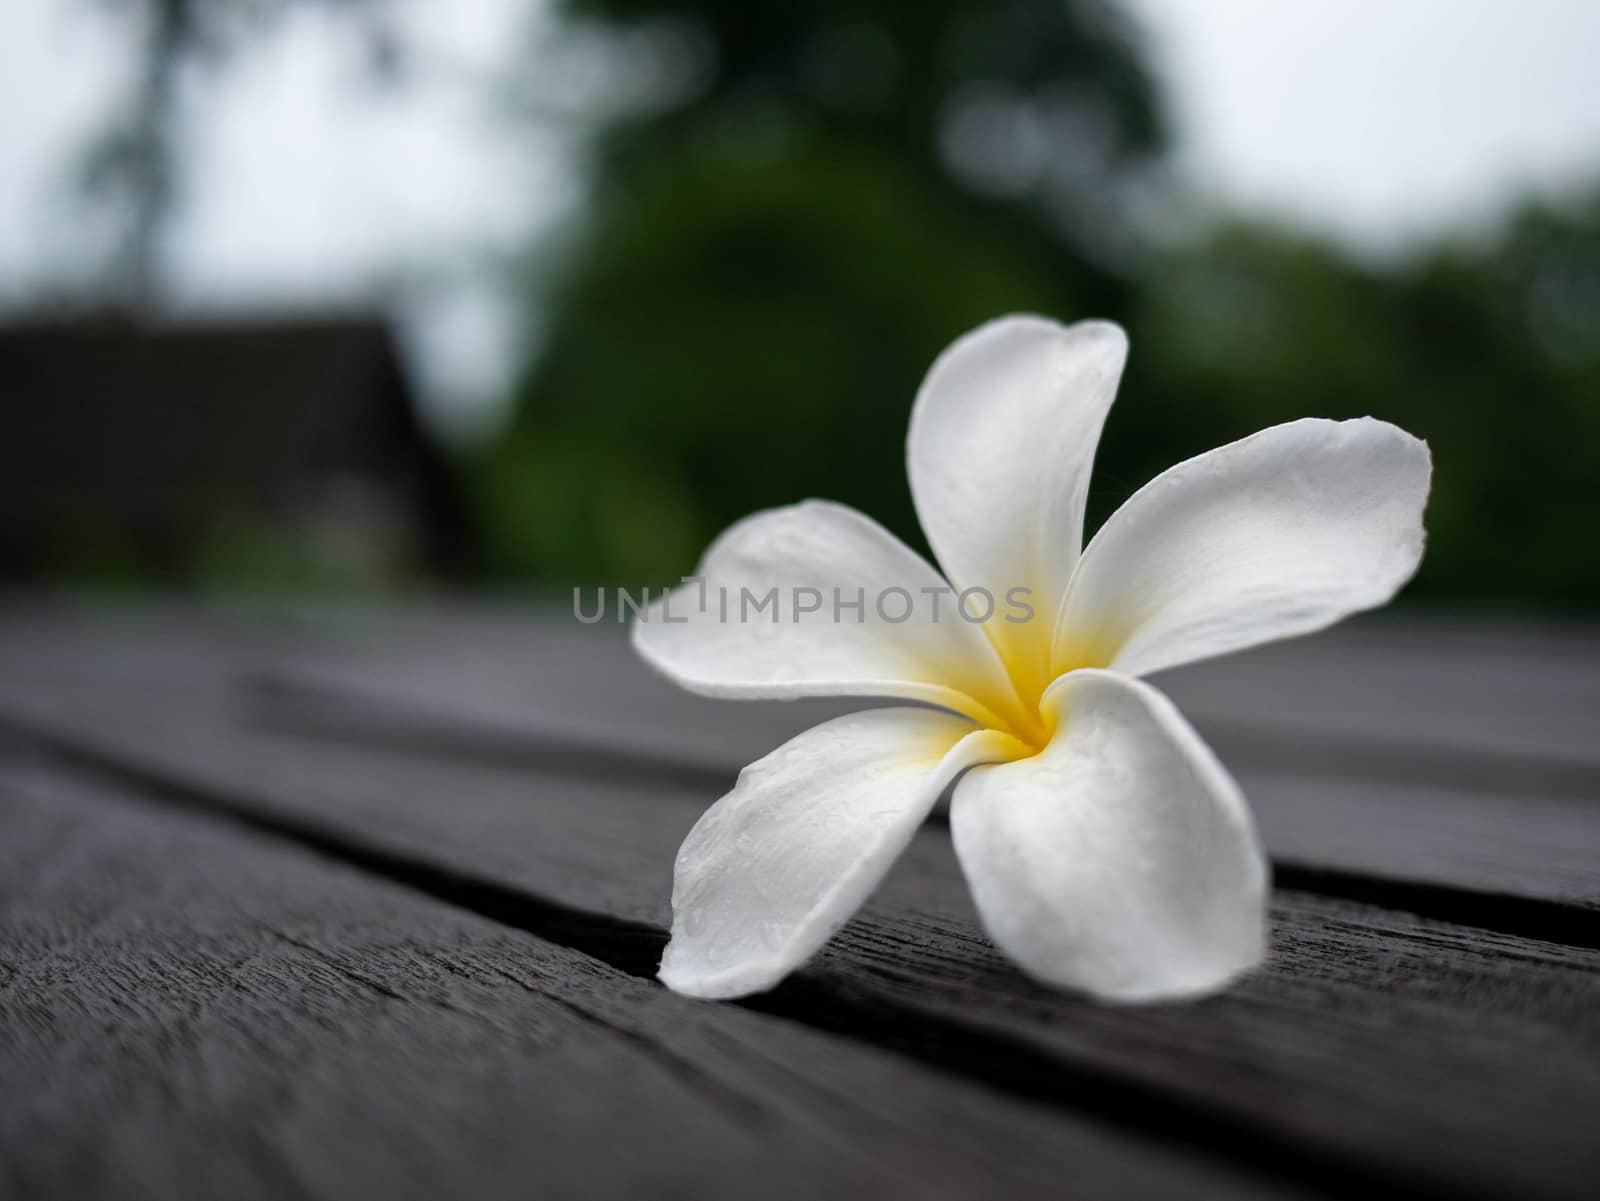 White plumeria flowers on wooden floor blurred background with Space for texts. The Thai name Leelawadee.